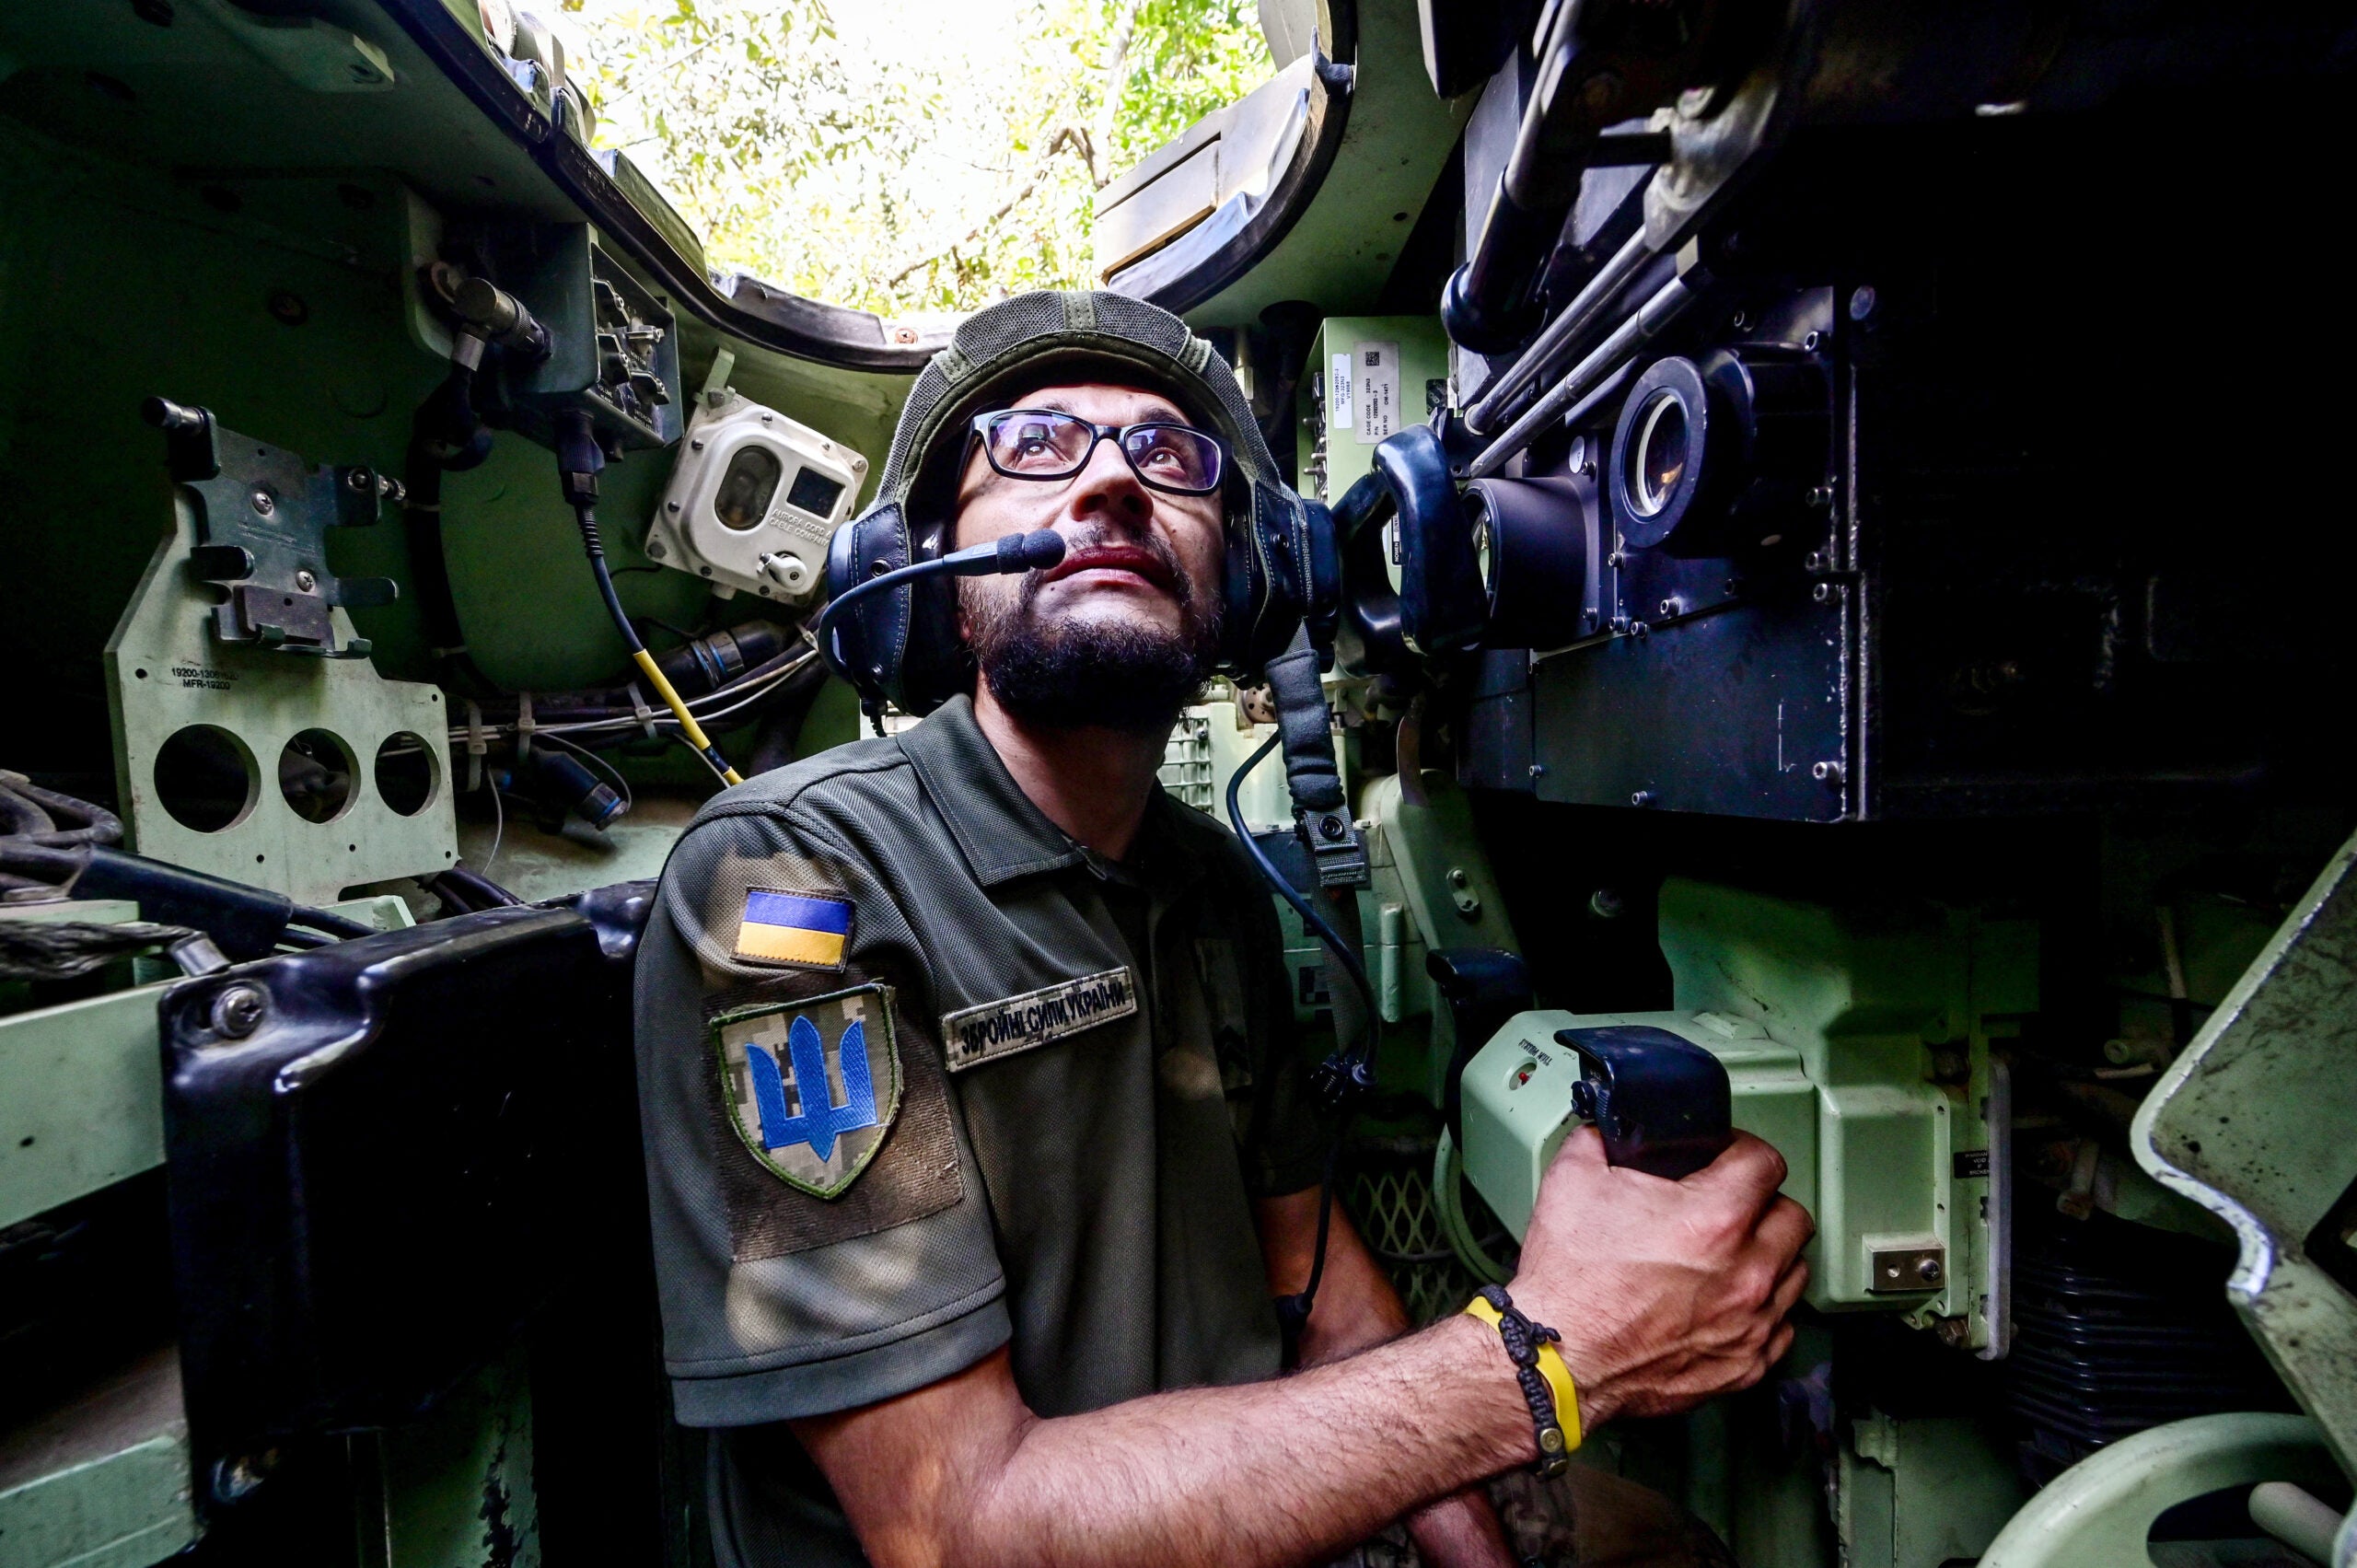 UKRAINE - SEPTEMBER 6, 2023 - Gunner 'Molfar', 39, a Bradley IFV crew member of the 47th Magura Mechanized Brigade who took part in the fighting to liberate Robotyne village from Russian invaders, is pictured inside the vehicle, Zaporizhzhia direction, southeastern Ukraine. NO USE RUSSIA. NO USE BELARUS. (Photo by Ukrinform/NurPhoto via Getty Images)